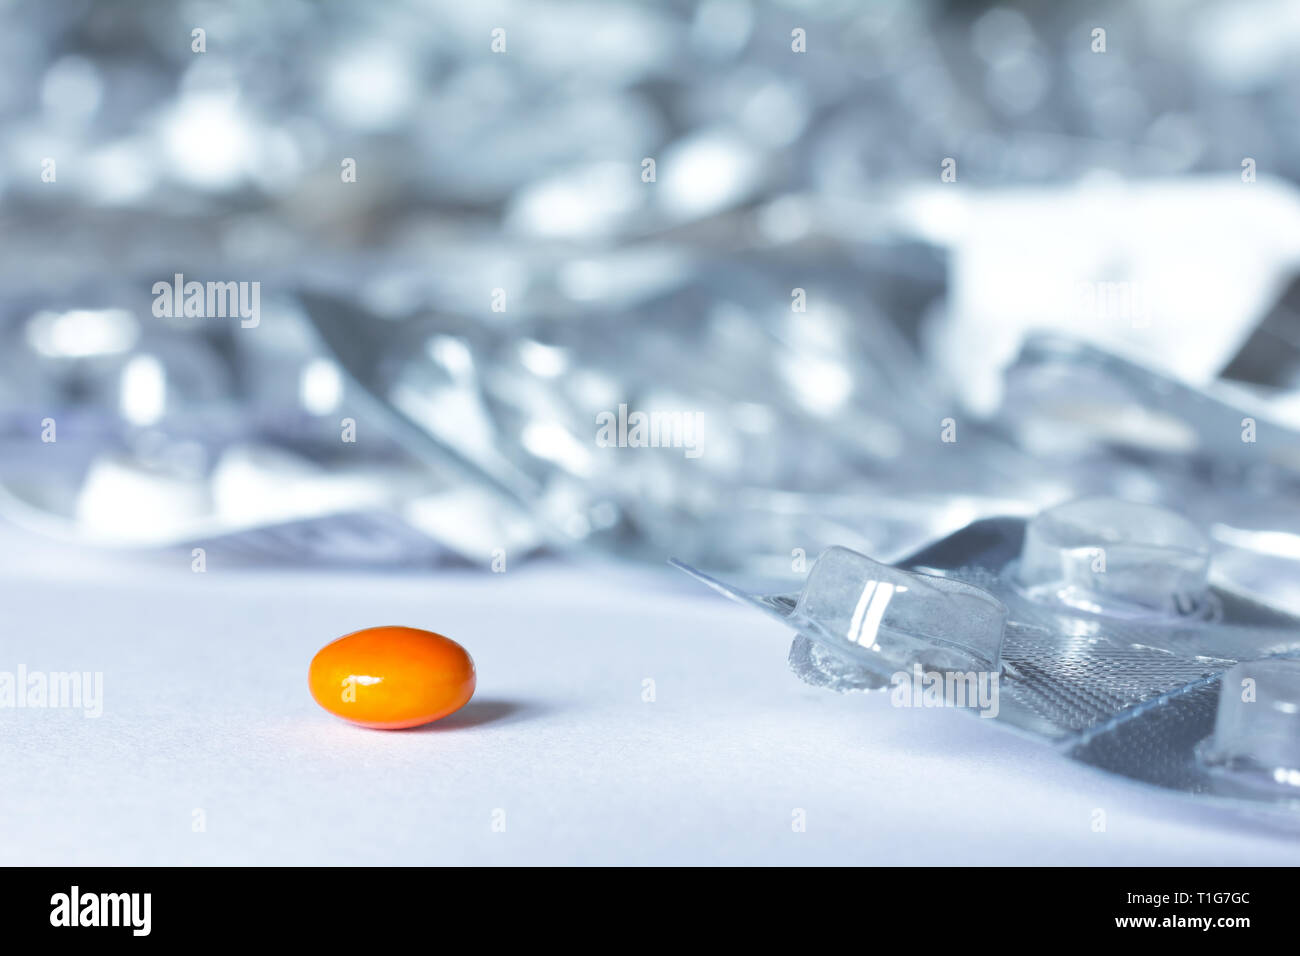 One single pill in front of many empty blister packages on white background, drug misuse concept Stock Photo